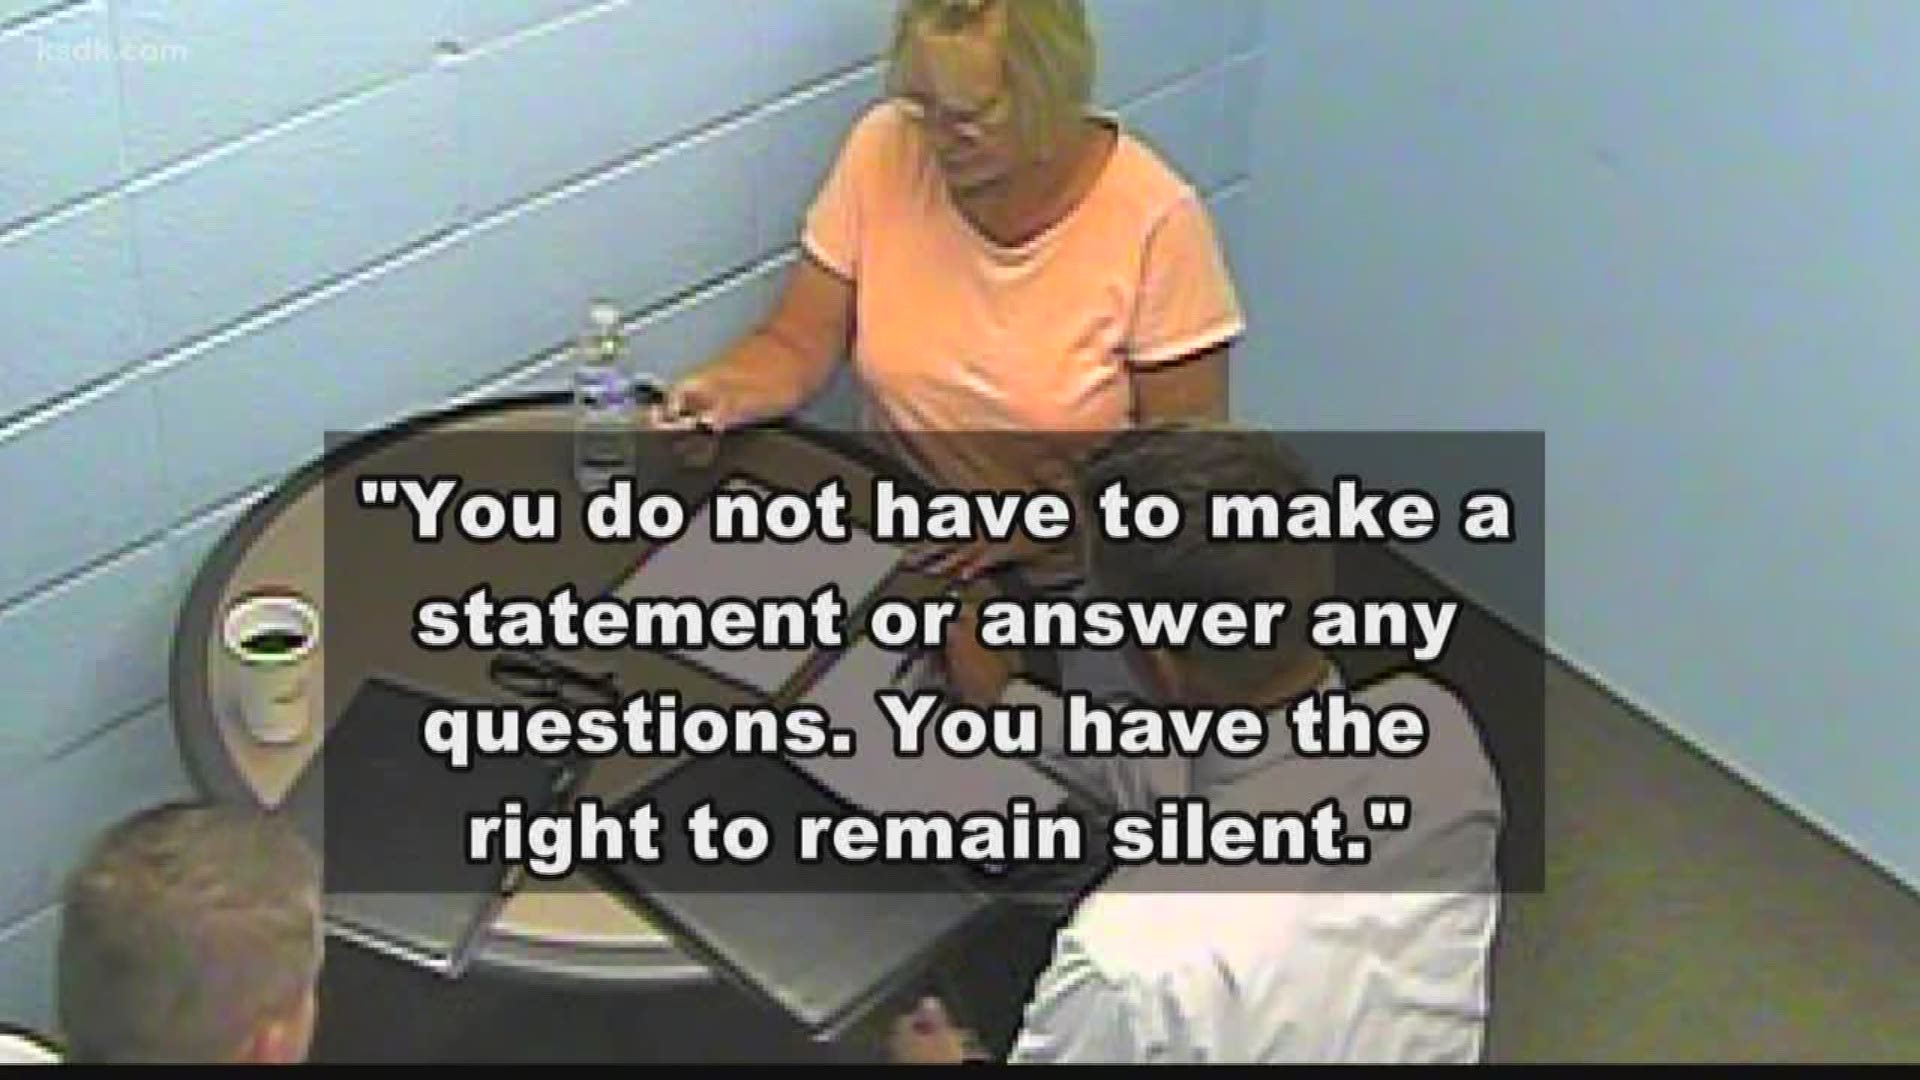 Footage from inside a police interrogation room details the dramatic chain of events that unfolded once officers had the now-convicted killer in their custody.